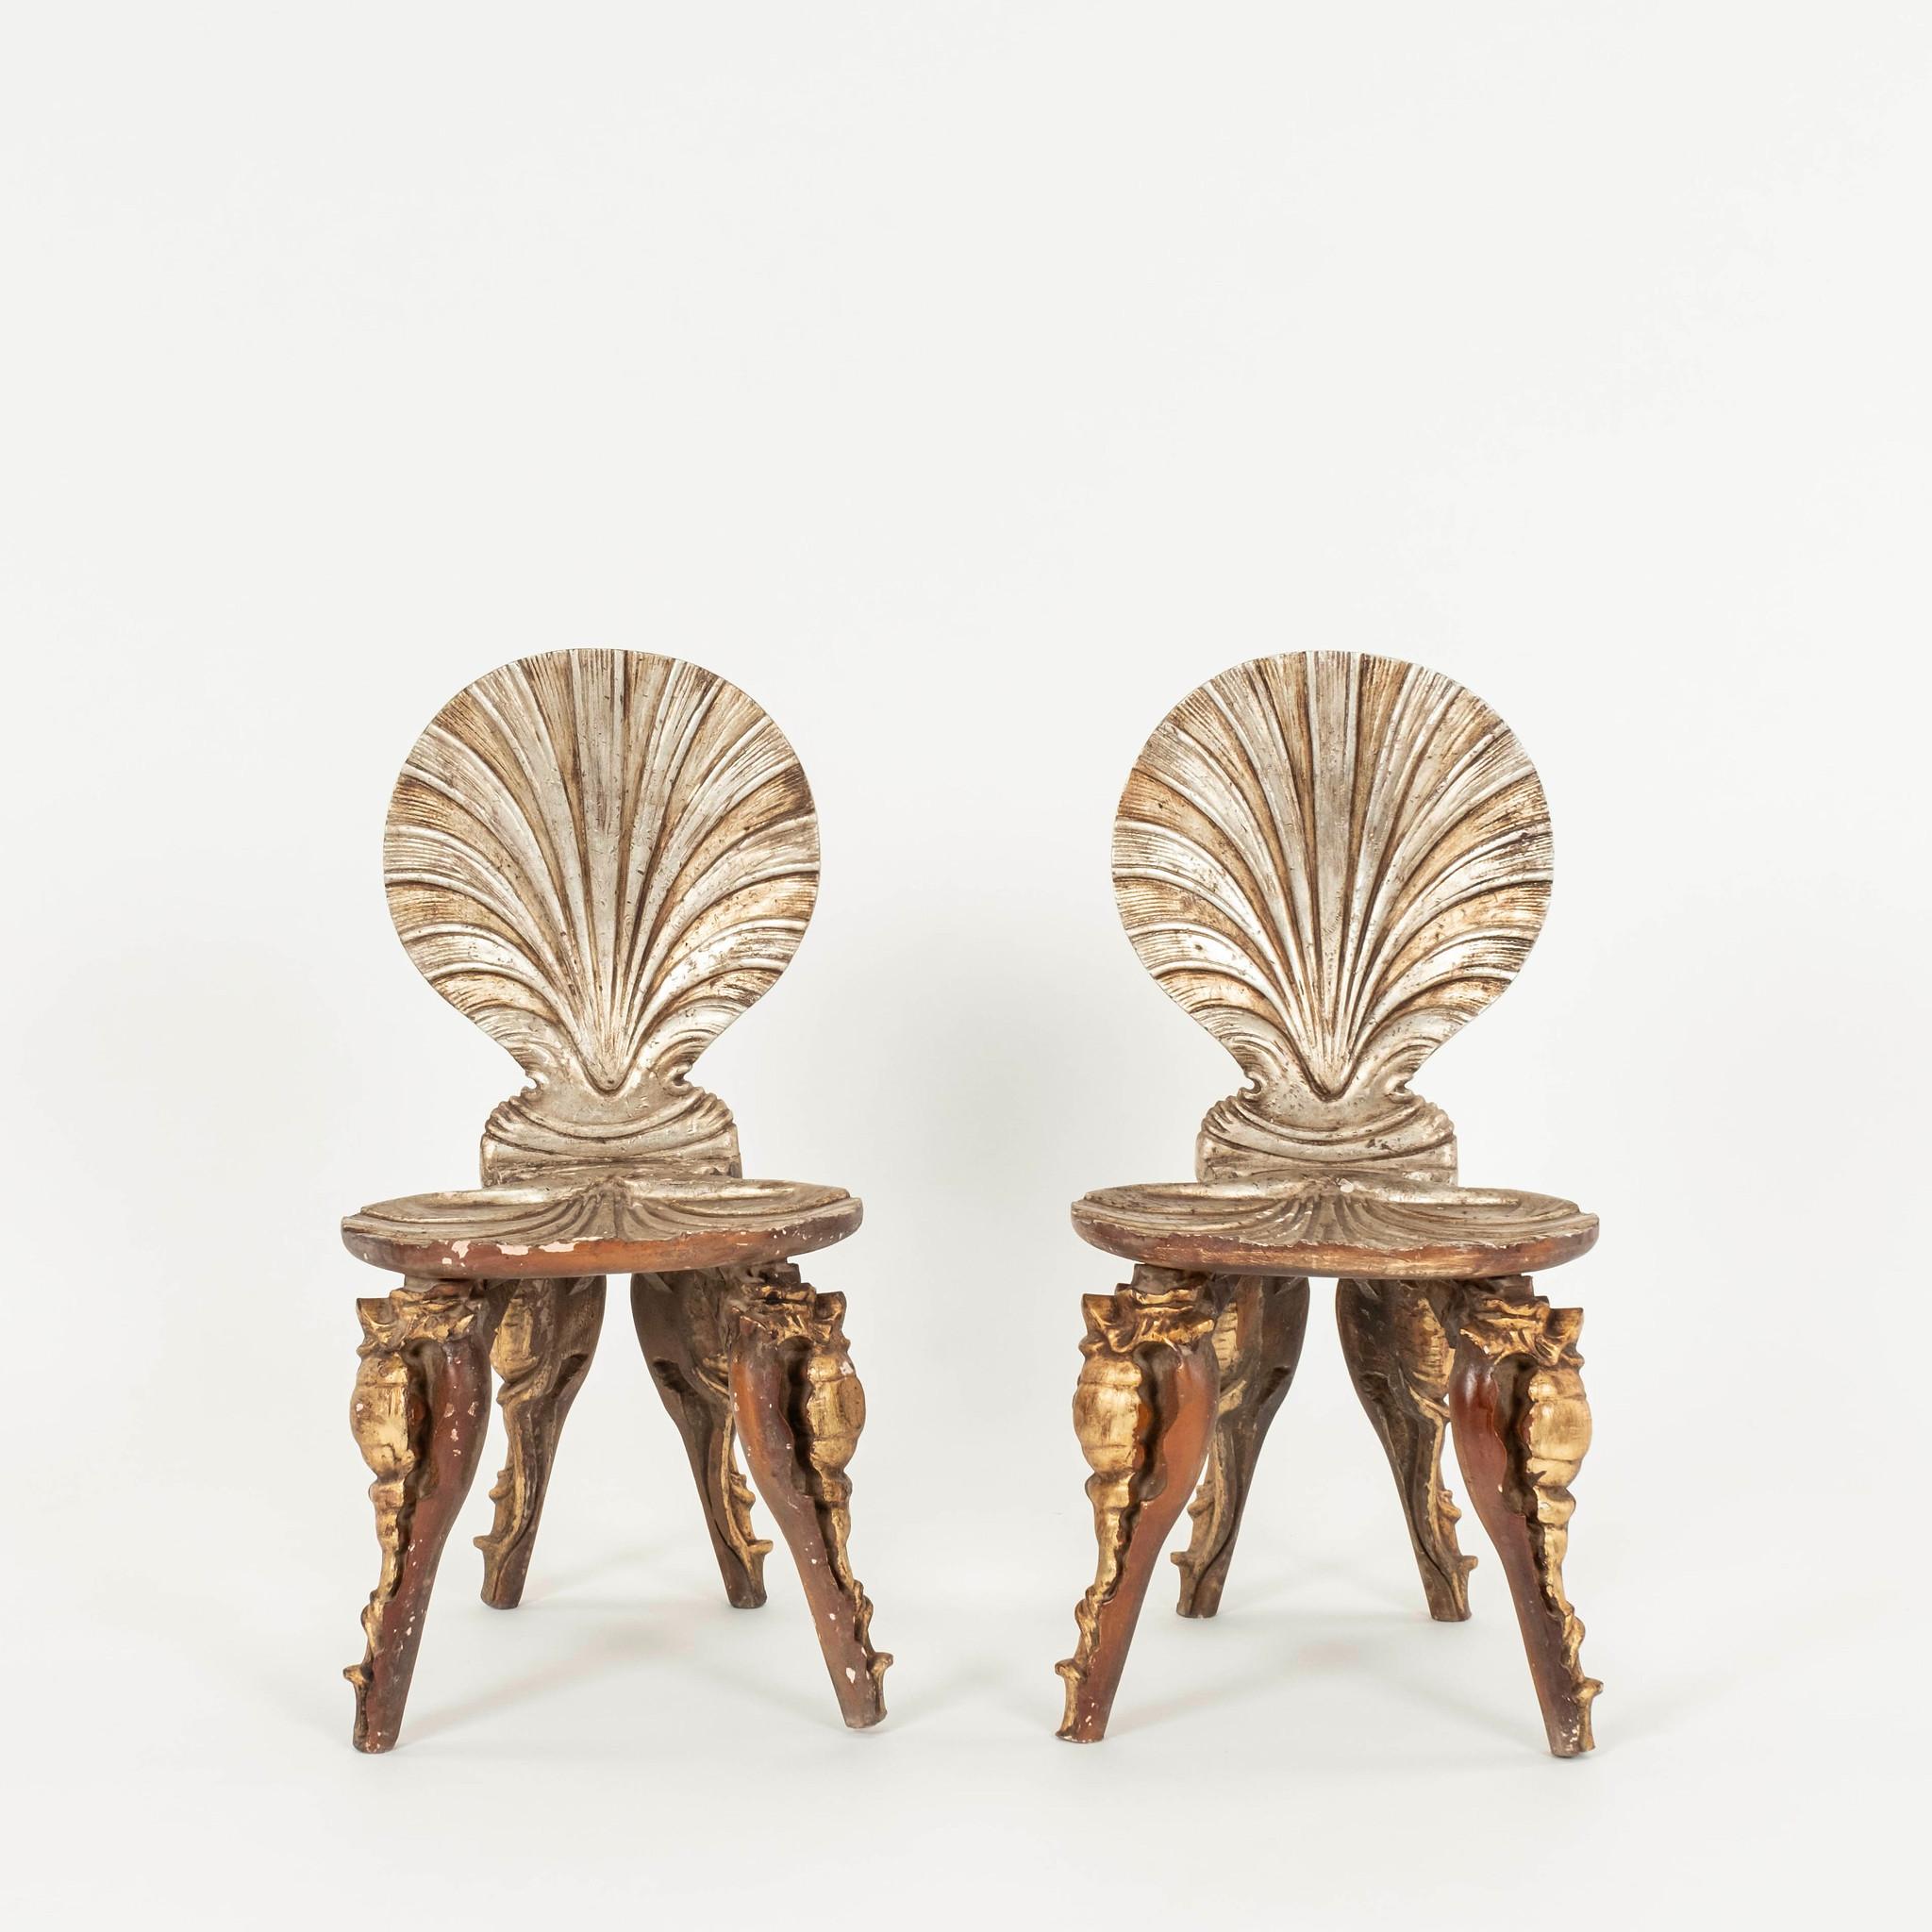 An iconic pair of 20th Century silver gold Italian giltwood grotto chairs with clamshell seat and back supported by beautifully carved conch legs.